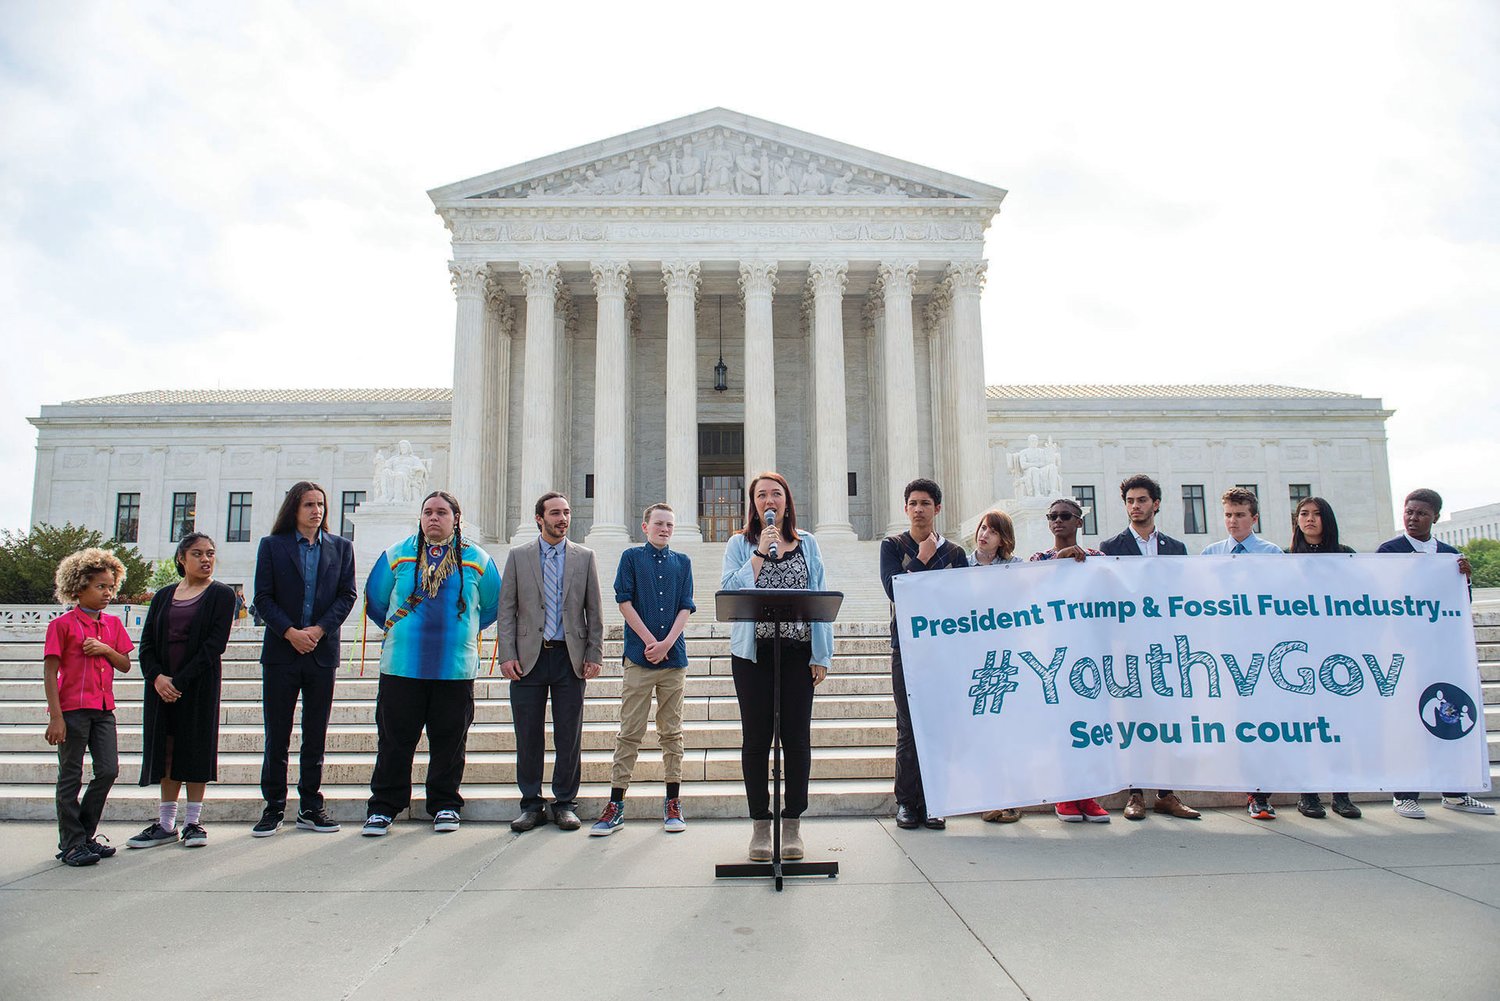 Kelsey Juliana, the oldest of the 21 young plaintiffs, delivers a speech in front of the U.S. Supreme Court building. Experiencing disasters from hurricanes to droughts in each of their communities, the kids and young adults involved in the case joined together to sue the U.S. Government for failing to mitigate climate change, impacting their rights as American citizens.